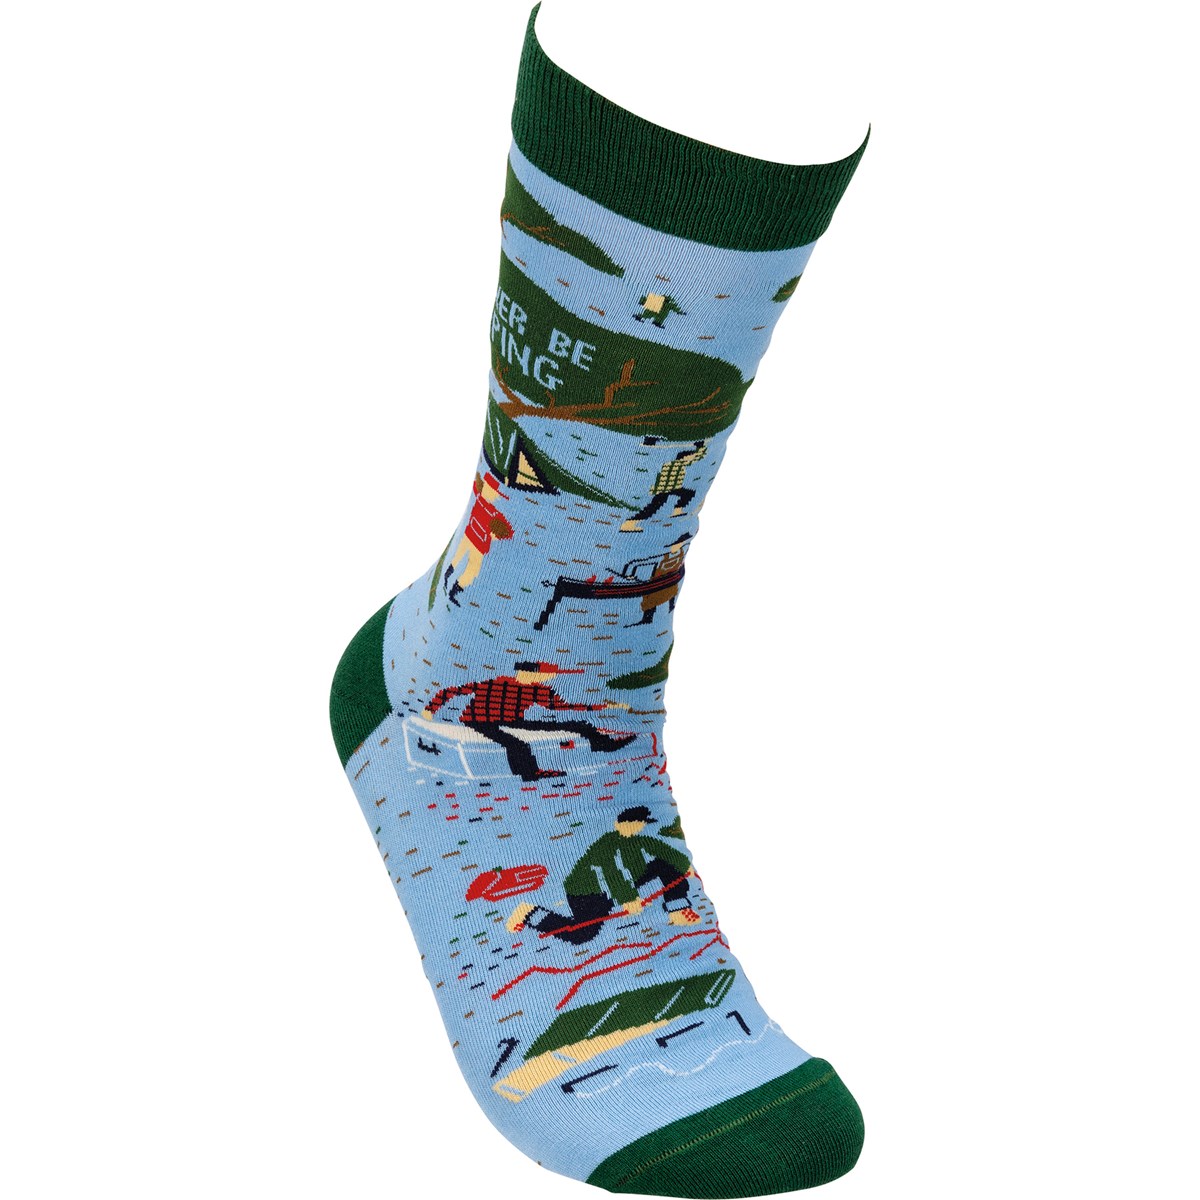 Socks - I'd Rather Be Camping - One Size Fits Most - Cotton, Nylon, Spandex